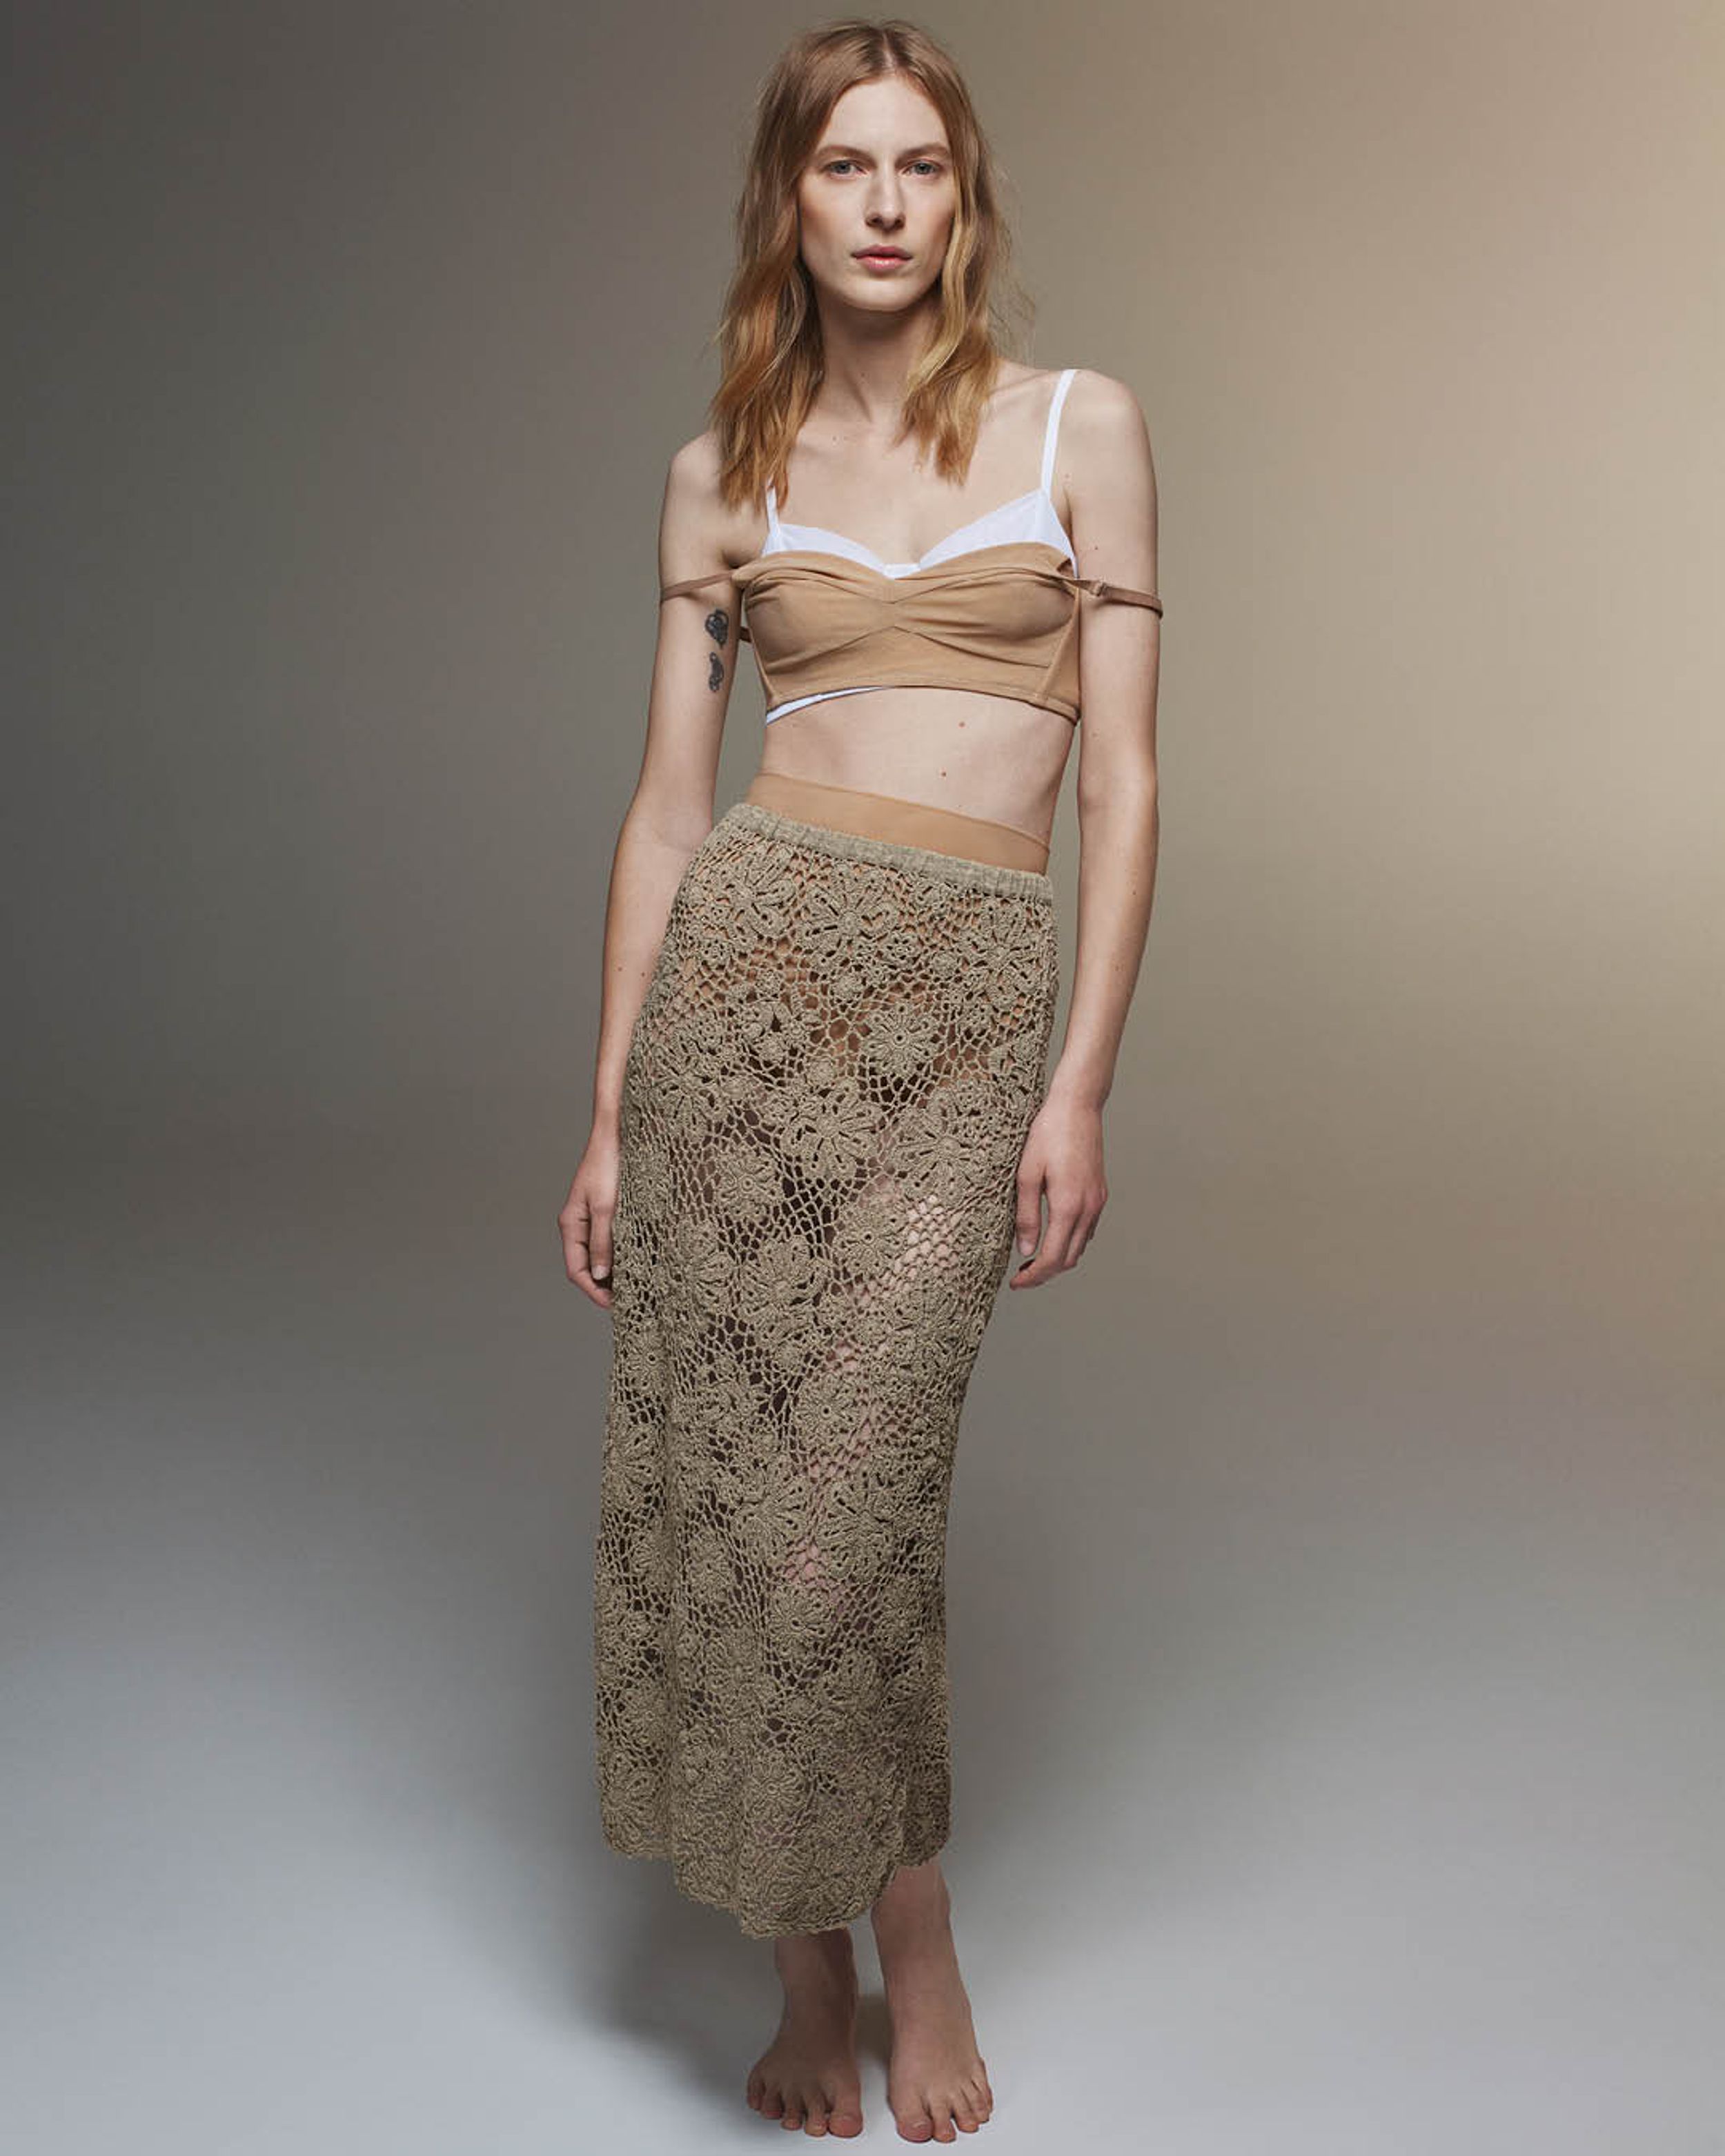 Julia Nobis wearing a beige mesh bra layered over a white mesh bra and taupe crocheted long skirt